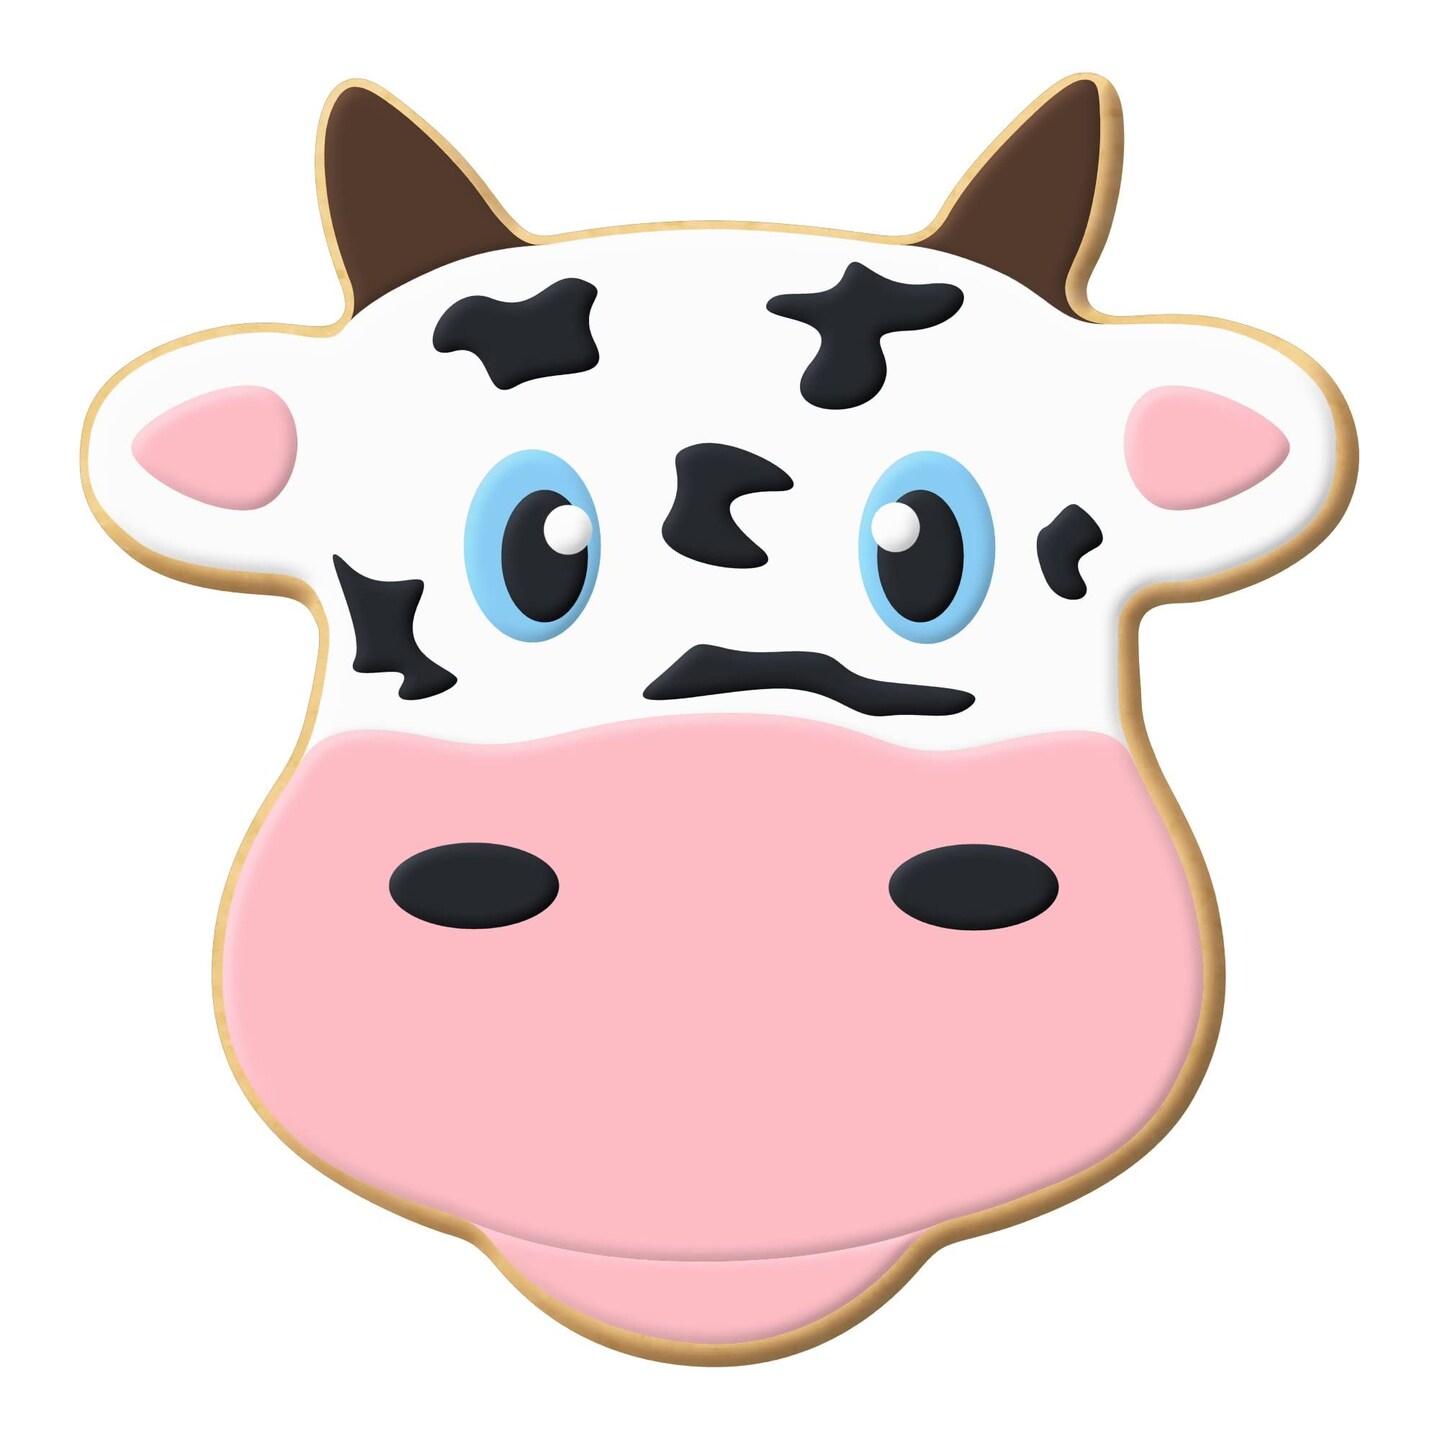 Cow Face Cookie Cutter 4.25 in B1608, CookieCutter.com, Tin Plated Steel, Handmade in the USA